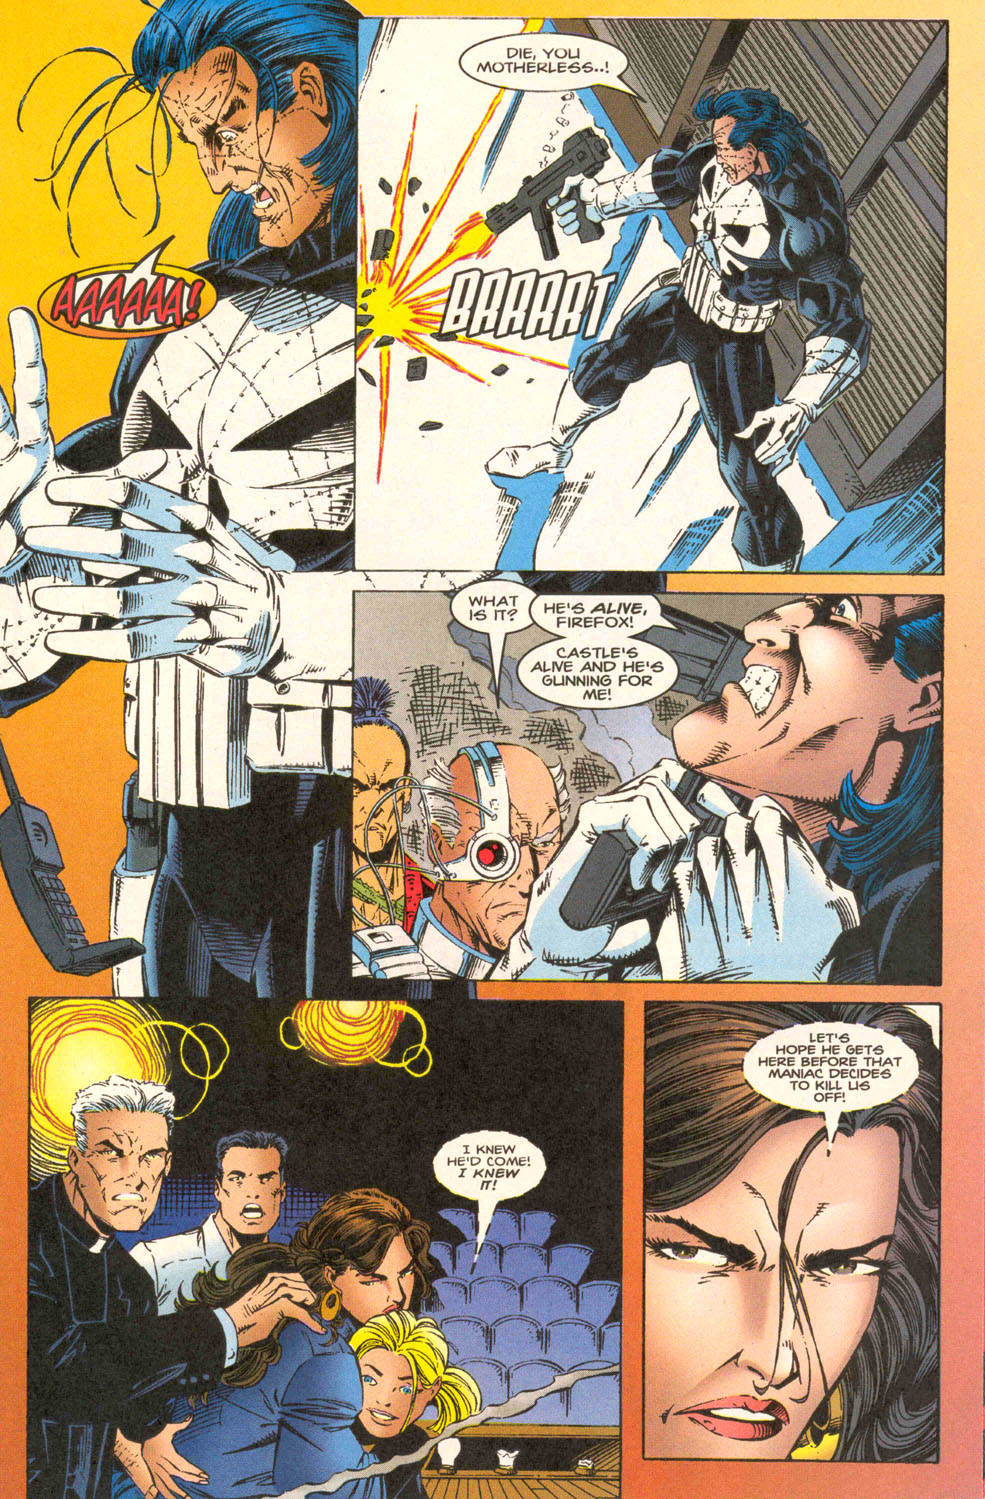 Punisher (1995) issue 10 - Last Shot Fired - Page 13